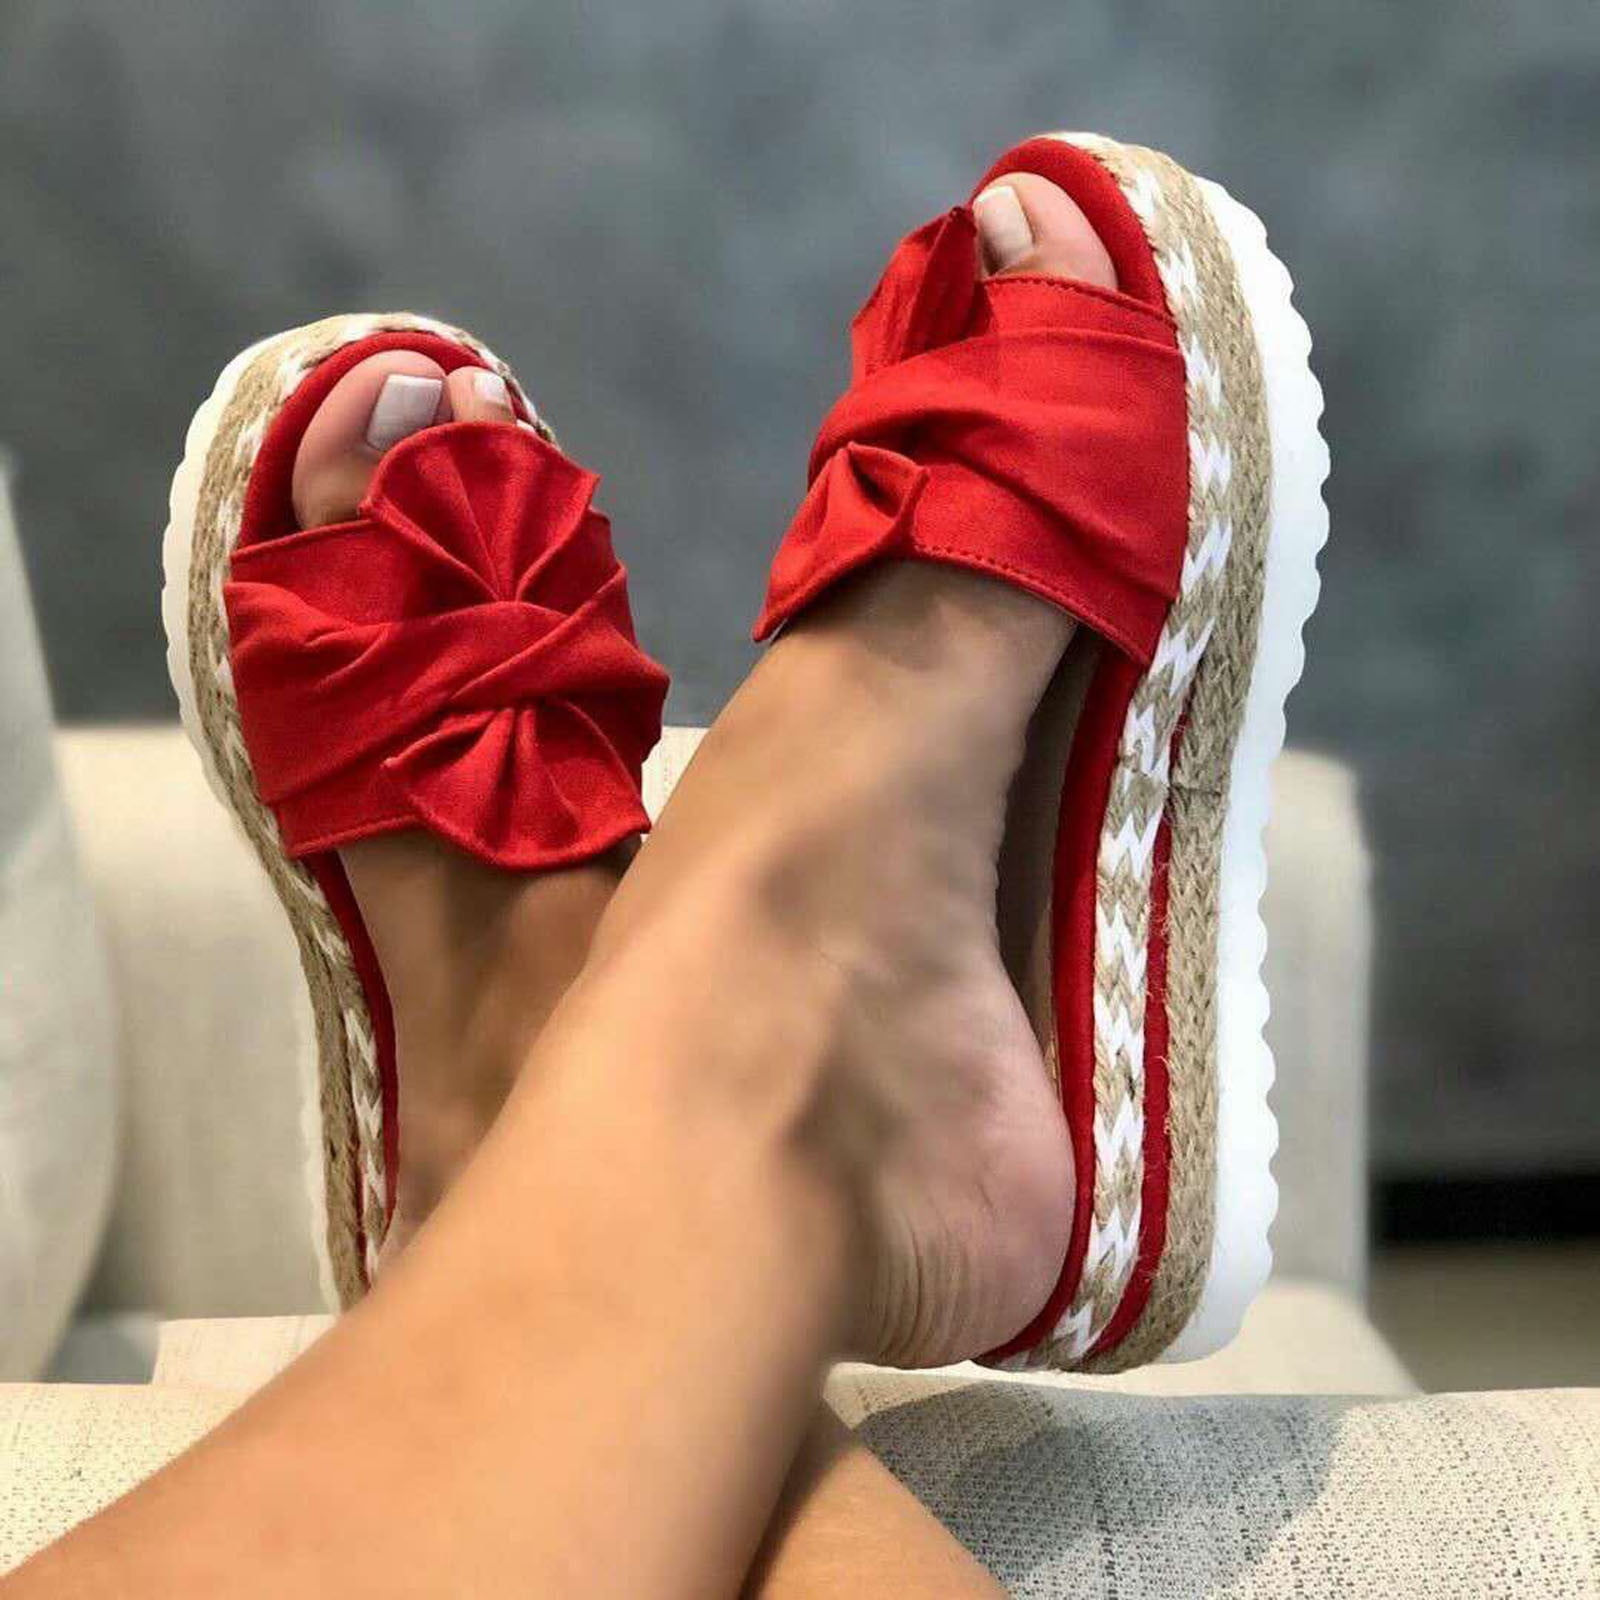 Girl Bohemian Sandals Bowknot Flat Sandals Ankle Strap Non-Slip Hook&Loop Sandals Casual Summer Beach Shoes Boho Shoes for Toddlers & Girls 